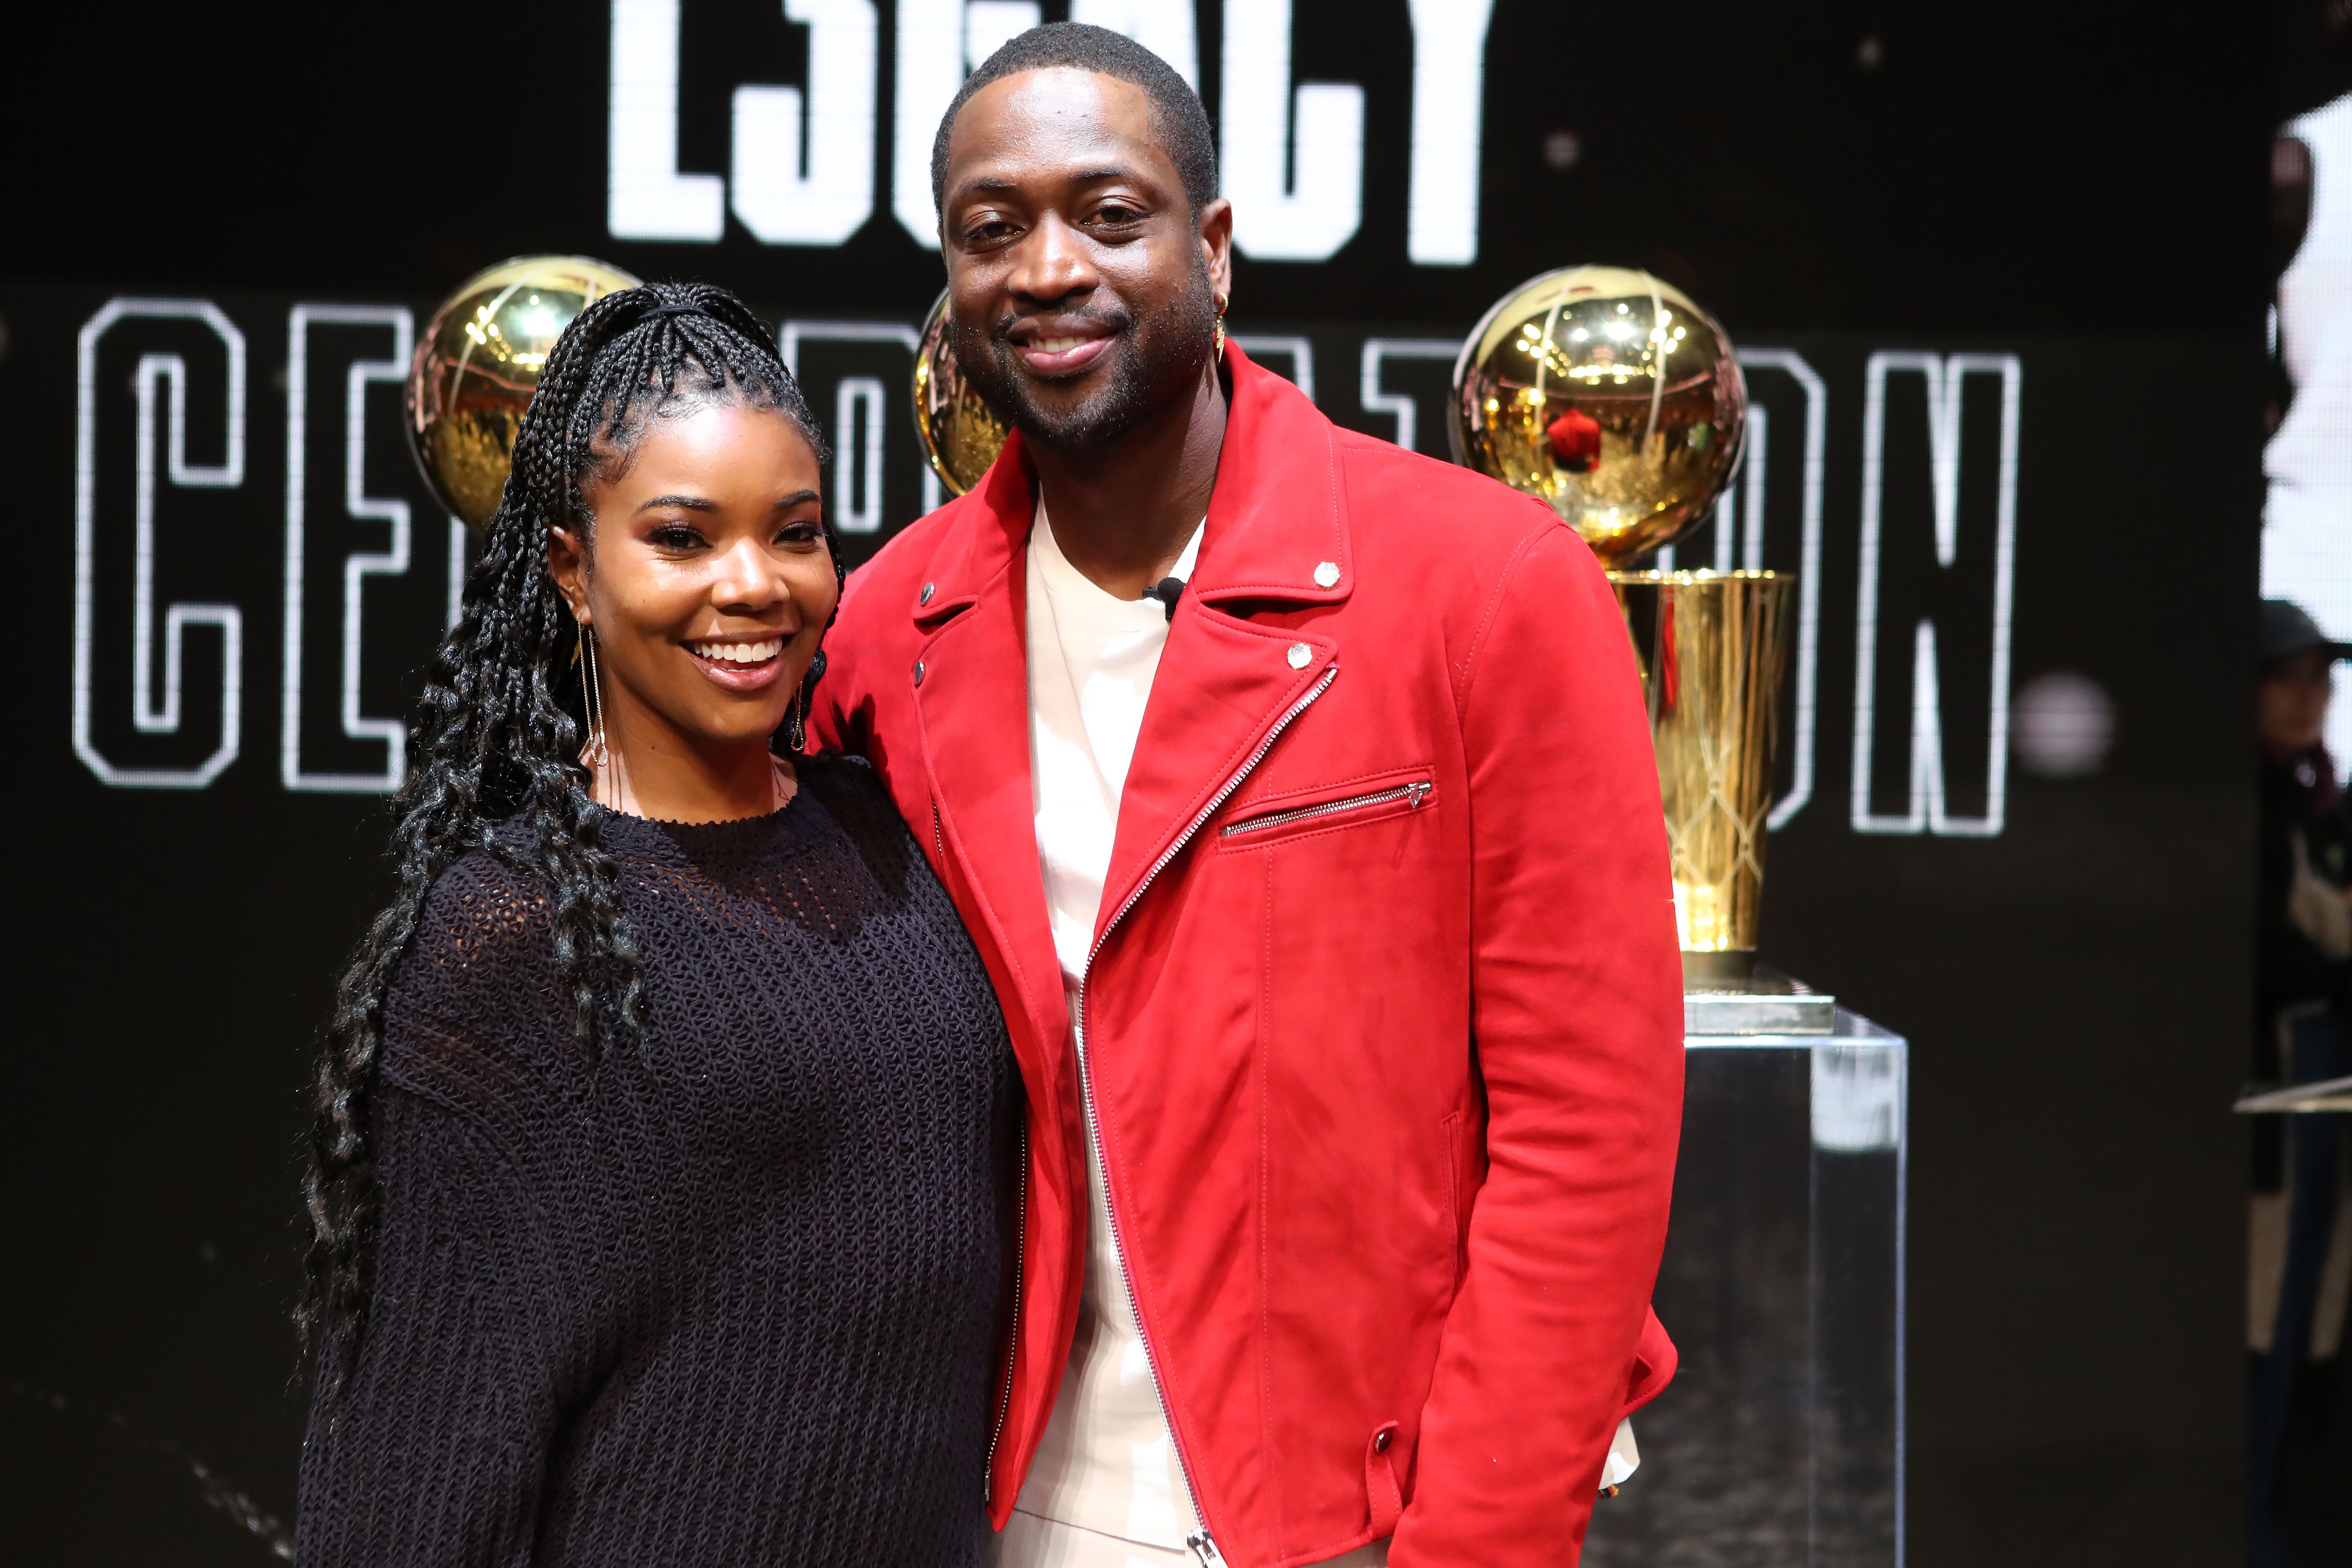 NBA Legend Dwyane Wade poses for a photo with his wife Gabrielle Union at the Jersey Retirement Flashback Event on February 21, 2020 | Photo: Getty Images